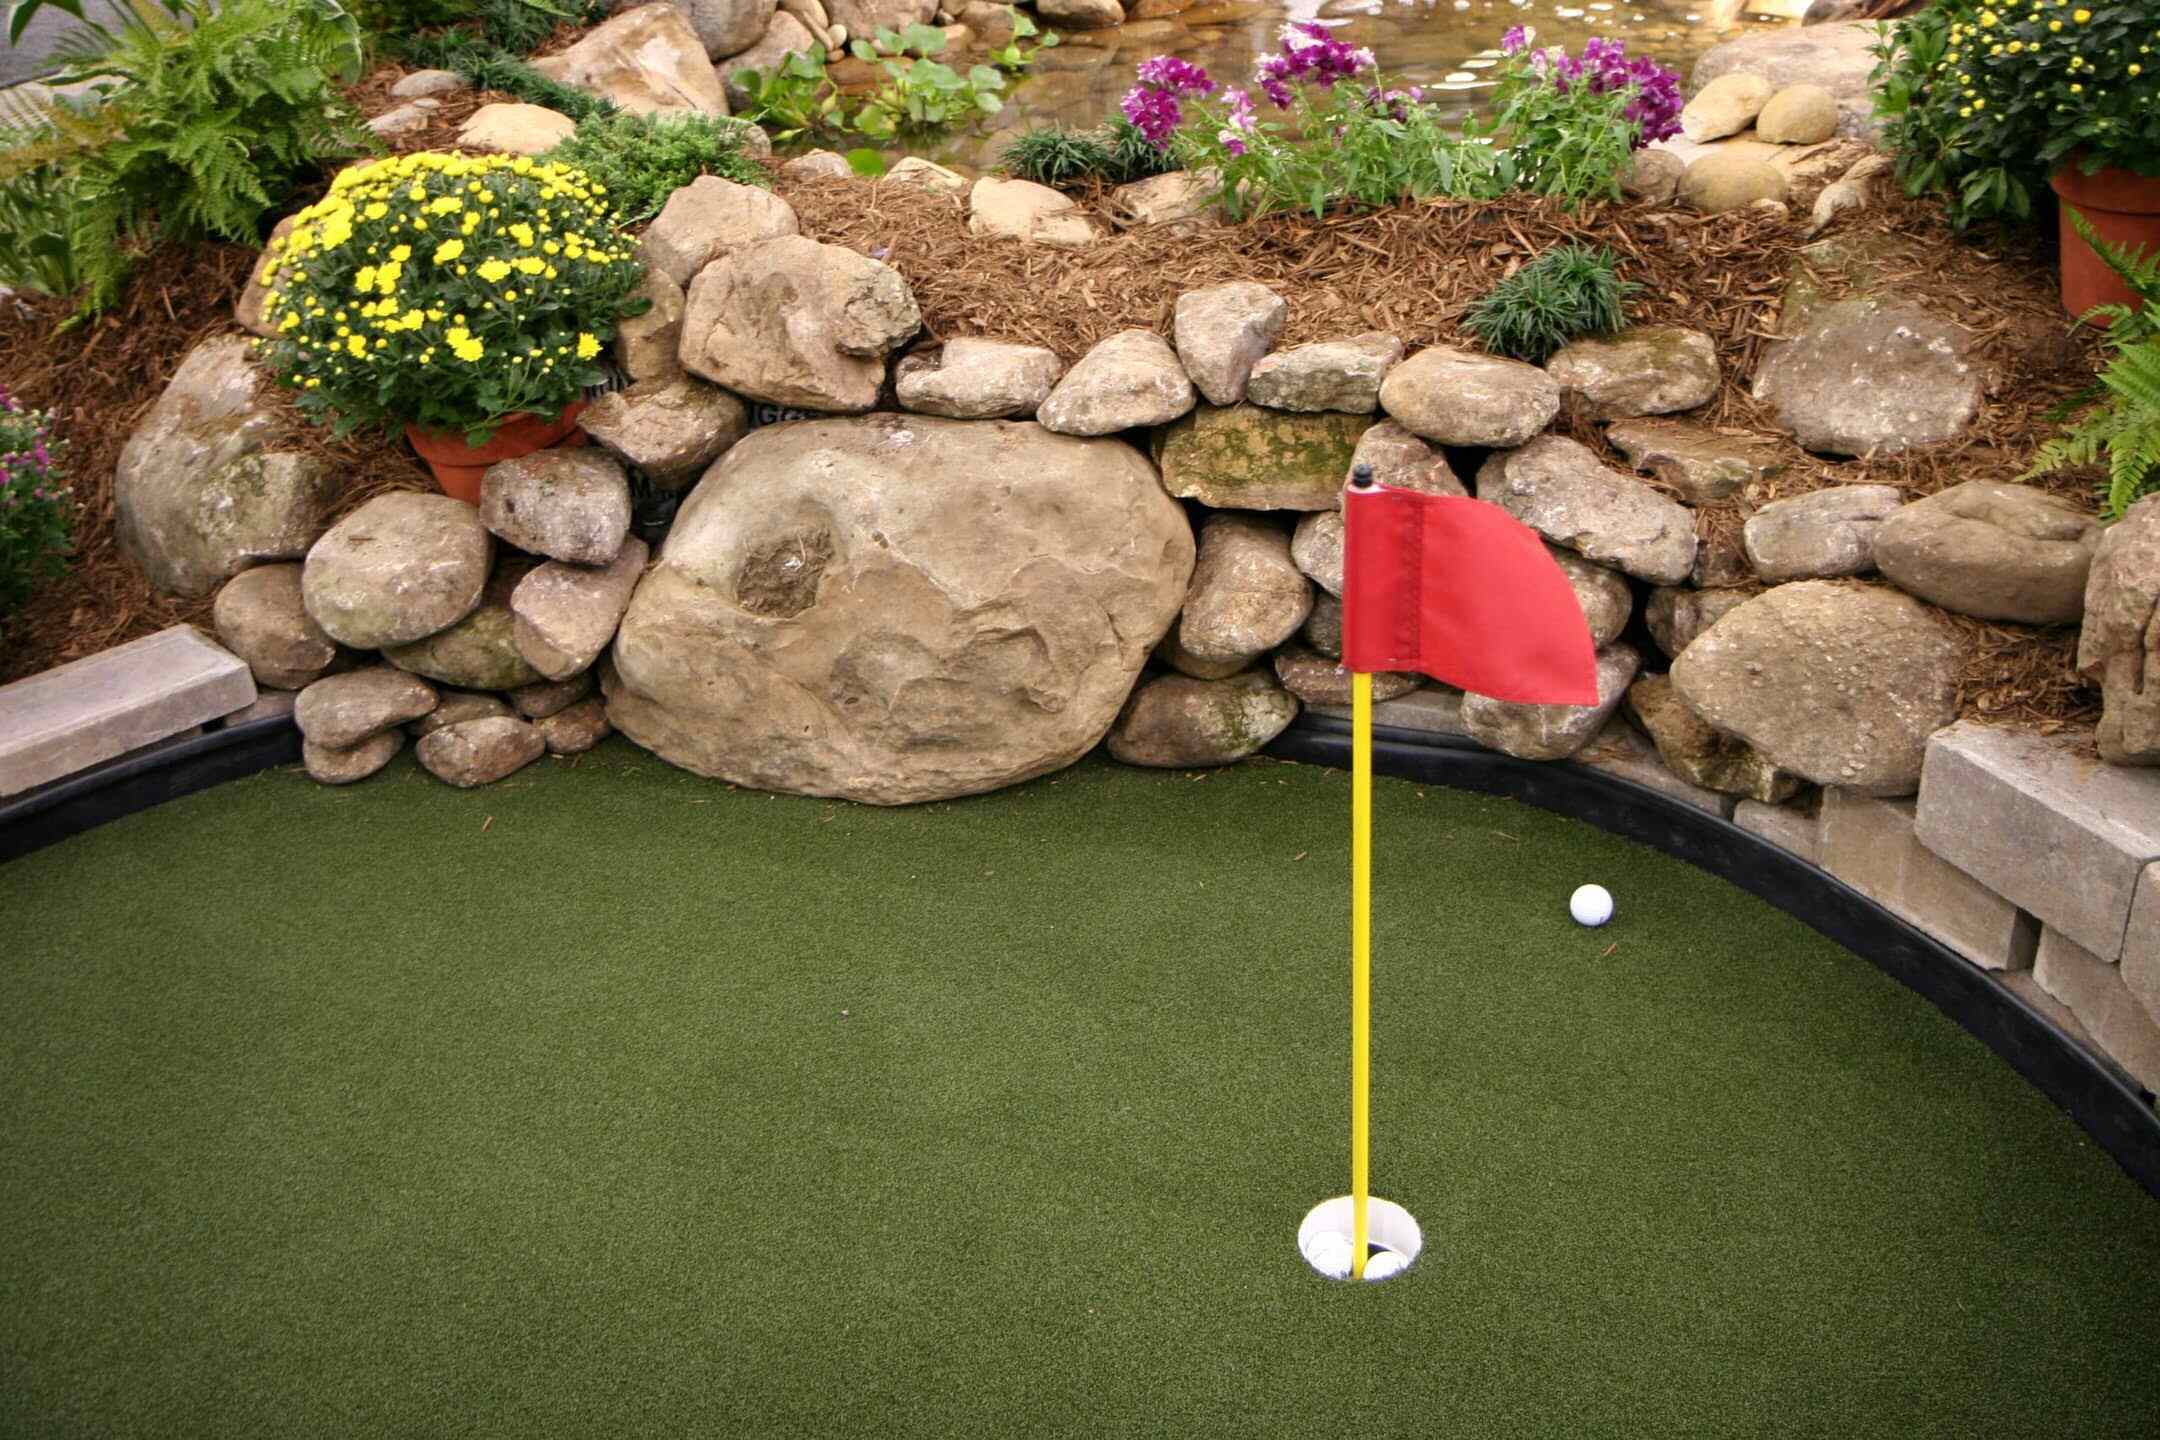 How To Build Outdoor Putting Green